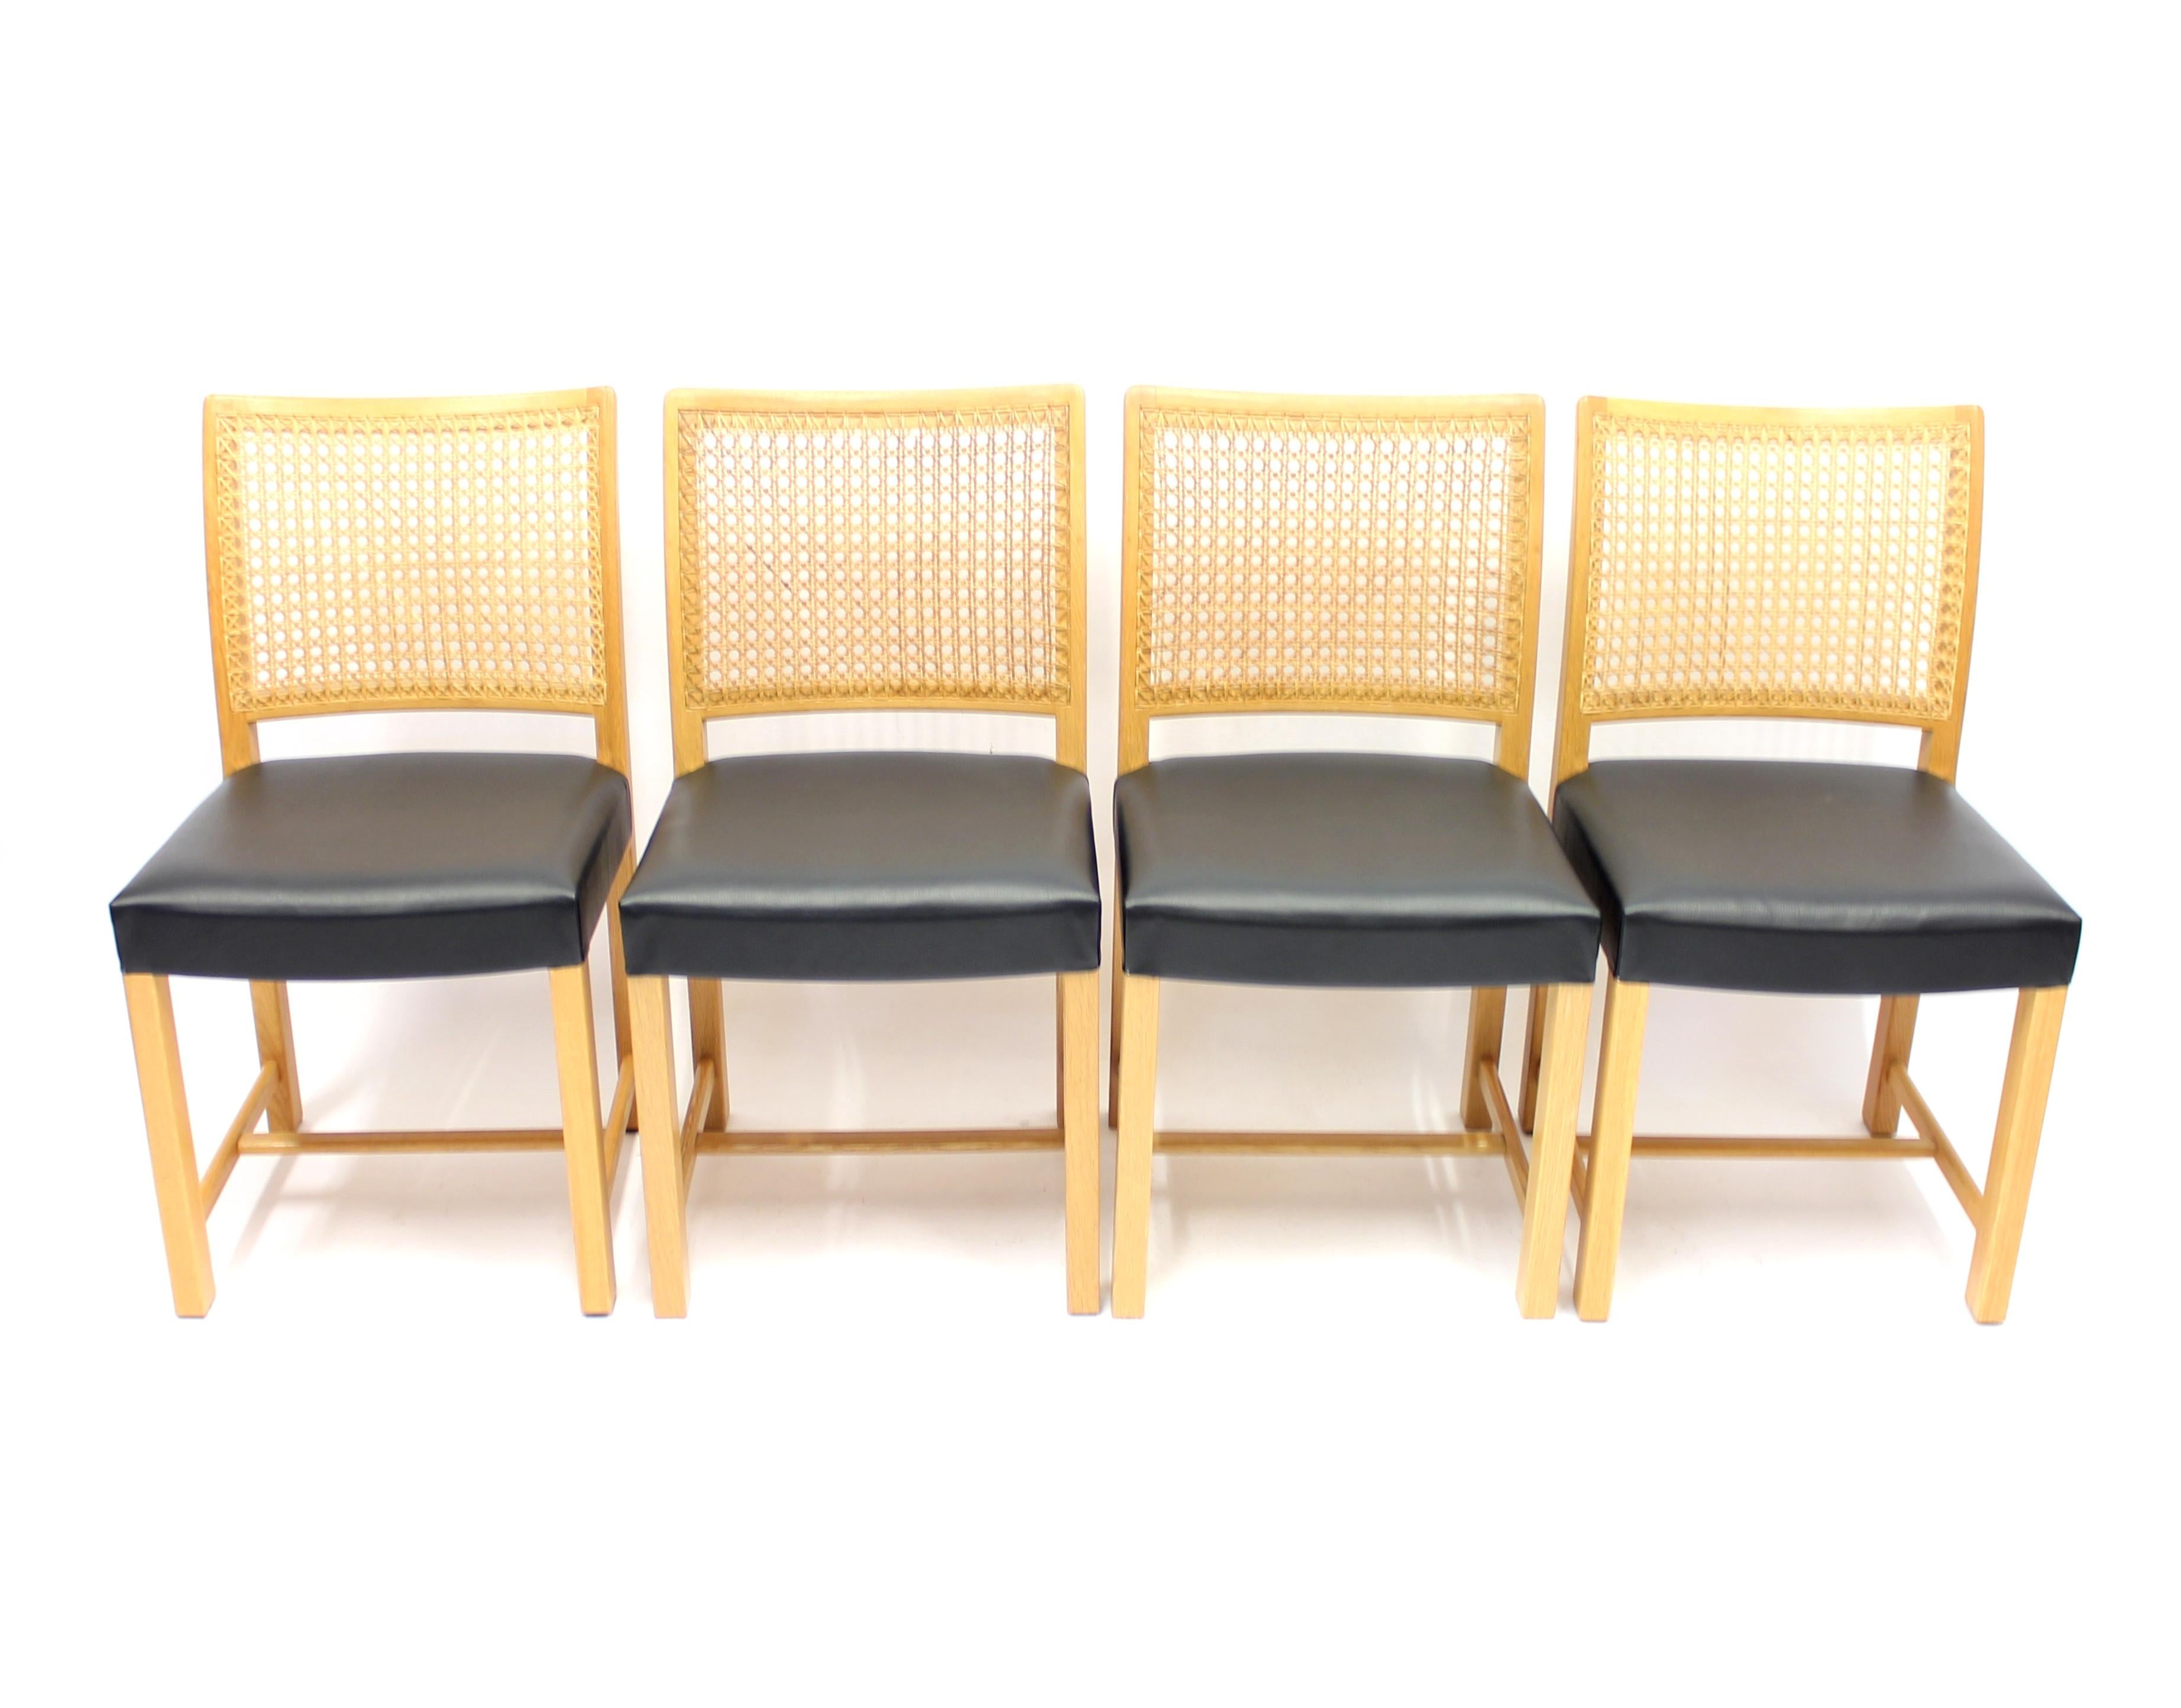 Set of 4 dining chairs designed by Carl Gustaf Hjort af Ornäs for Mikko Nupponen in the 1950s. Frame and legs of solid oak, cane back and new black leather upholstery on the seats.